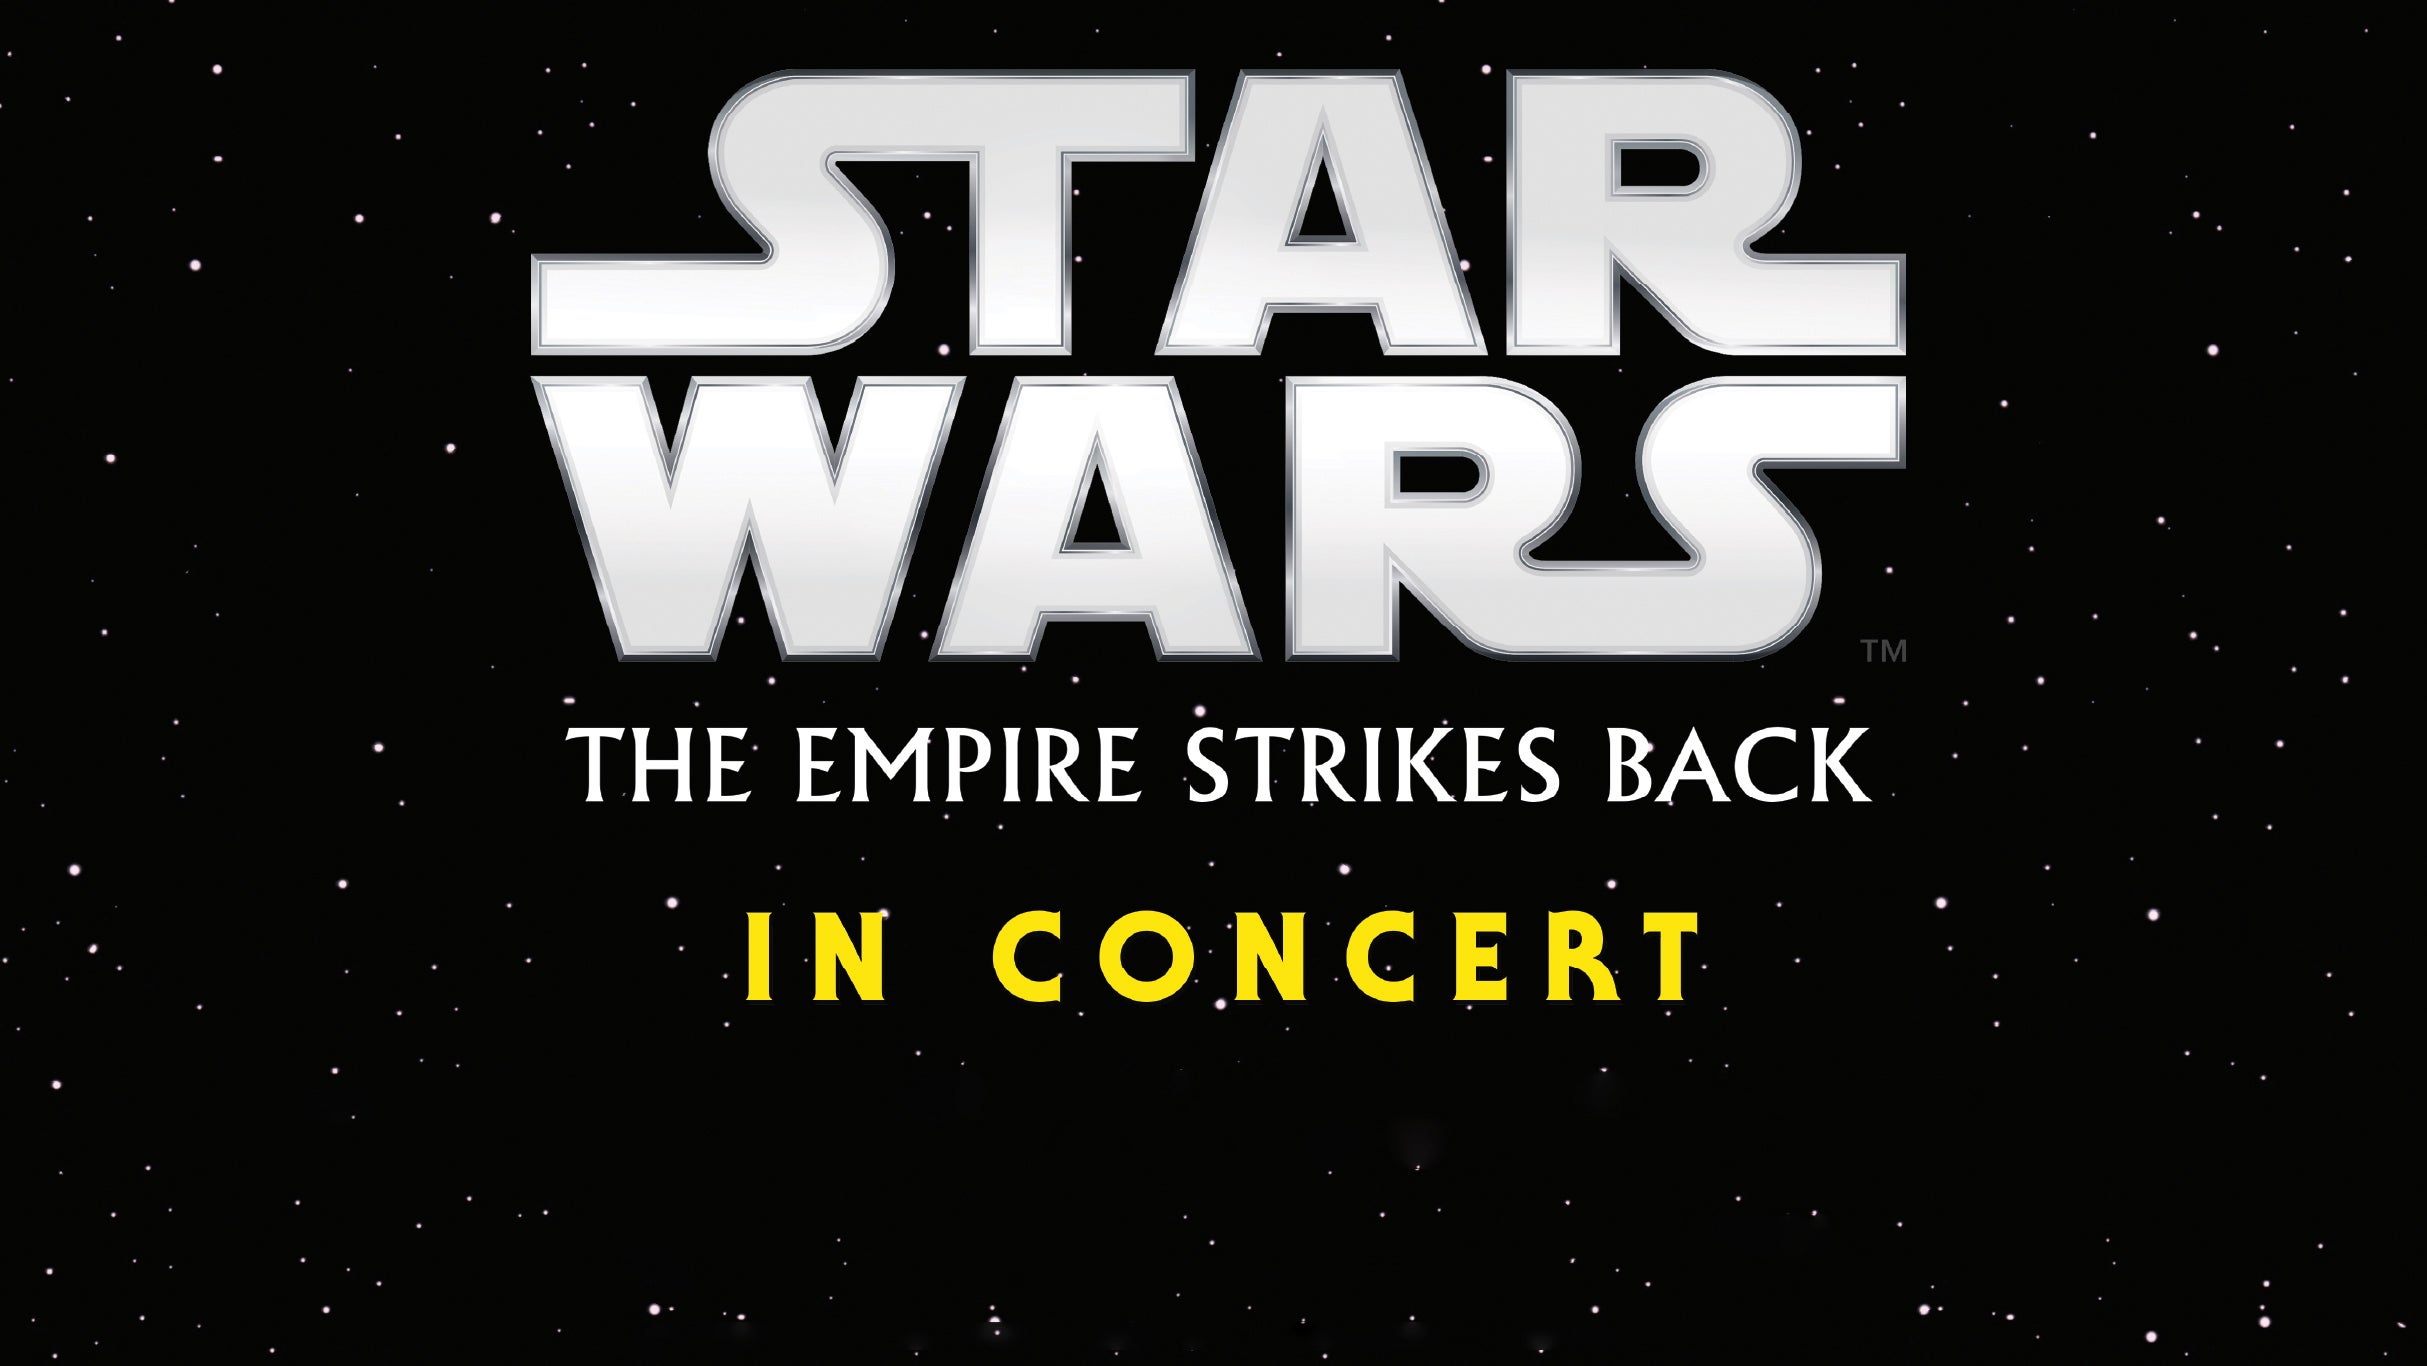 Star Wars: The Empire Strikes Back - In Concert pre-sale password for real tickets in Ottawa